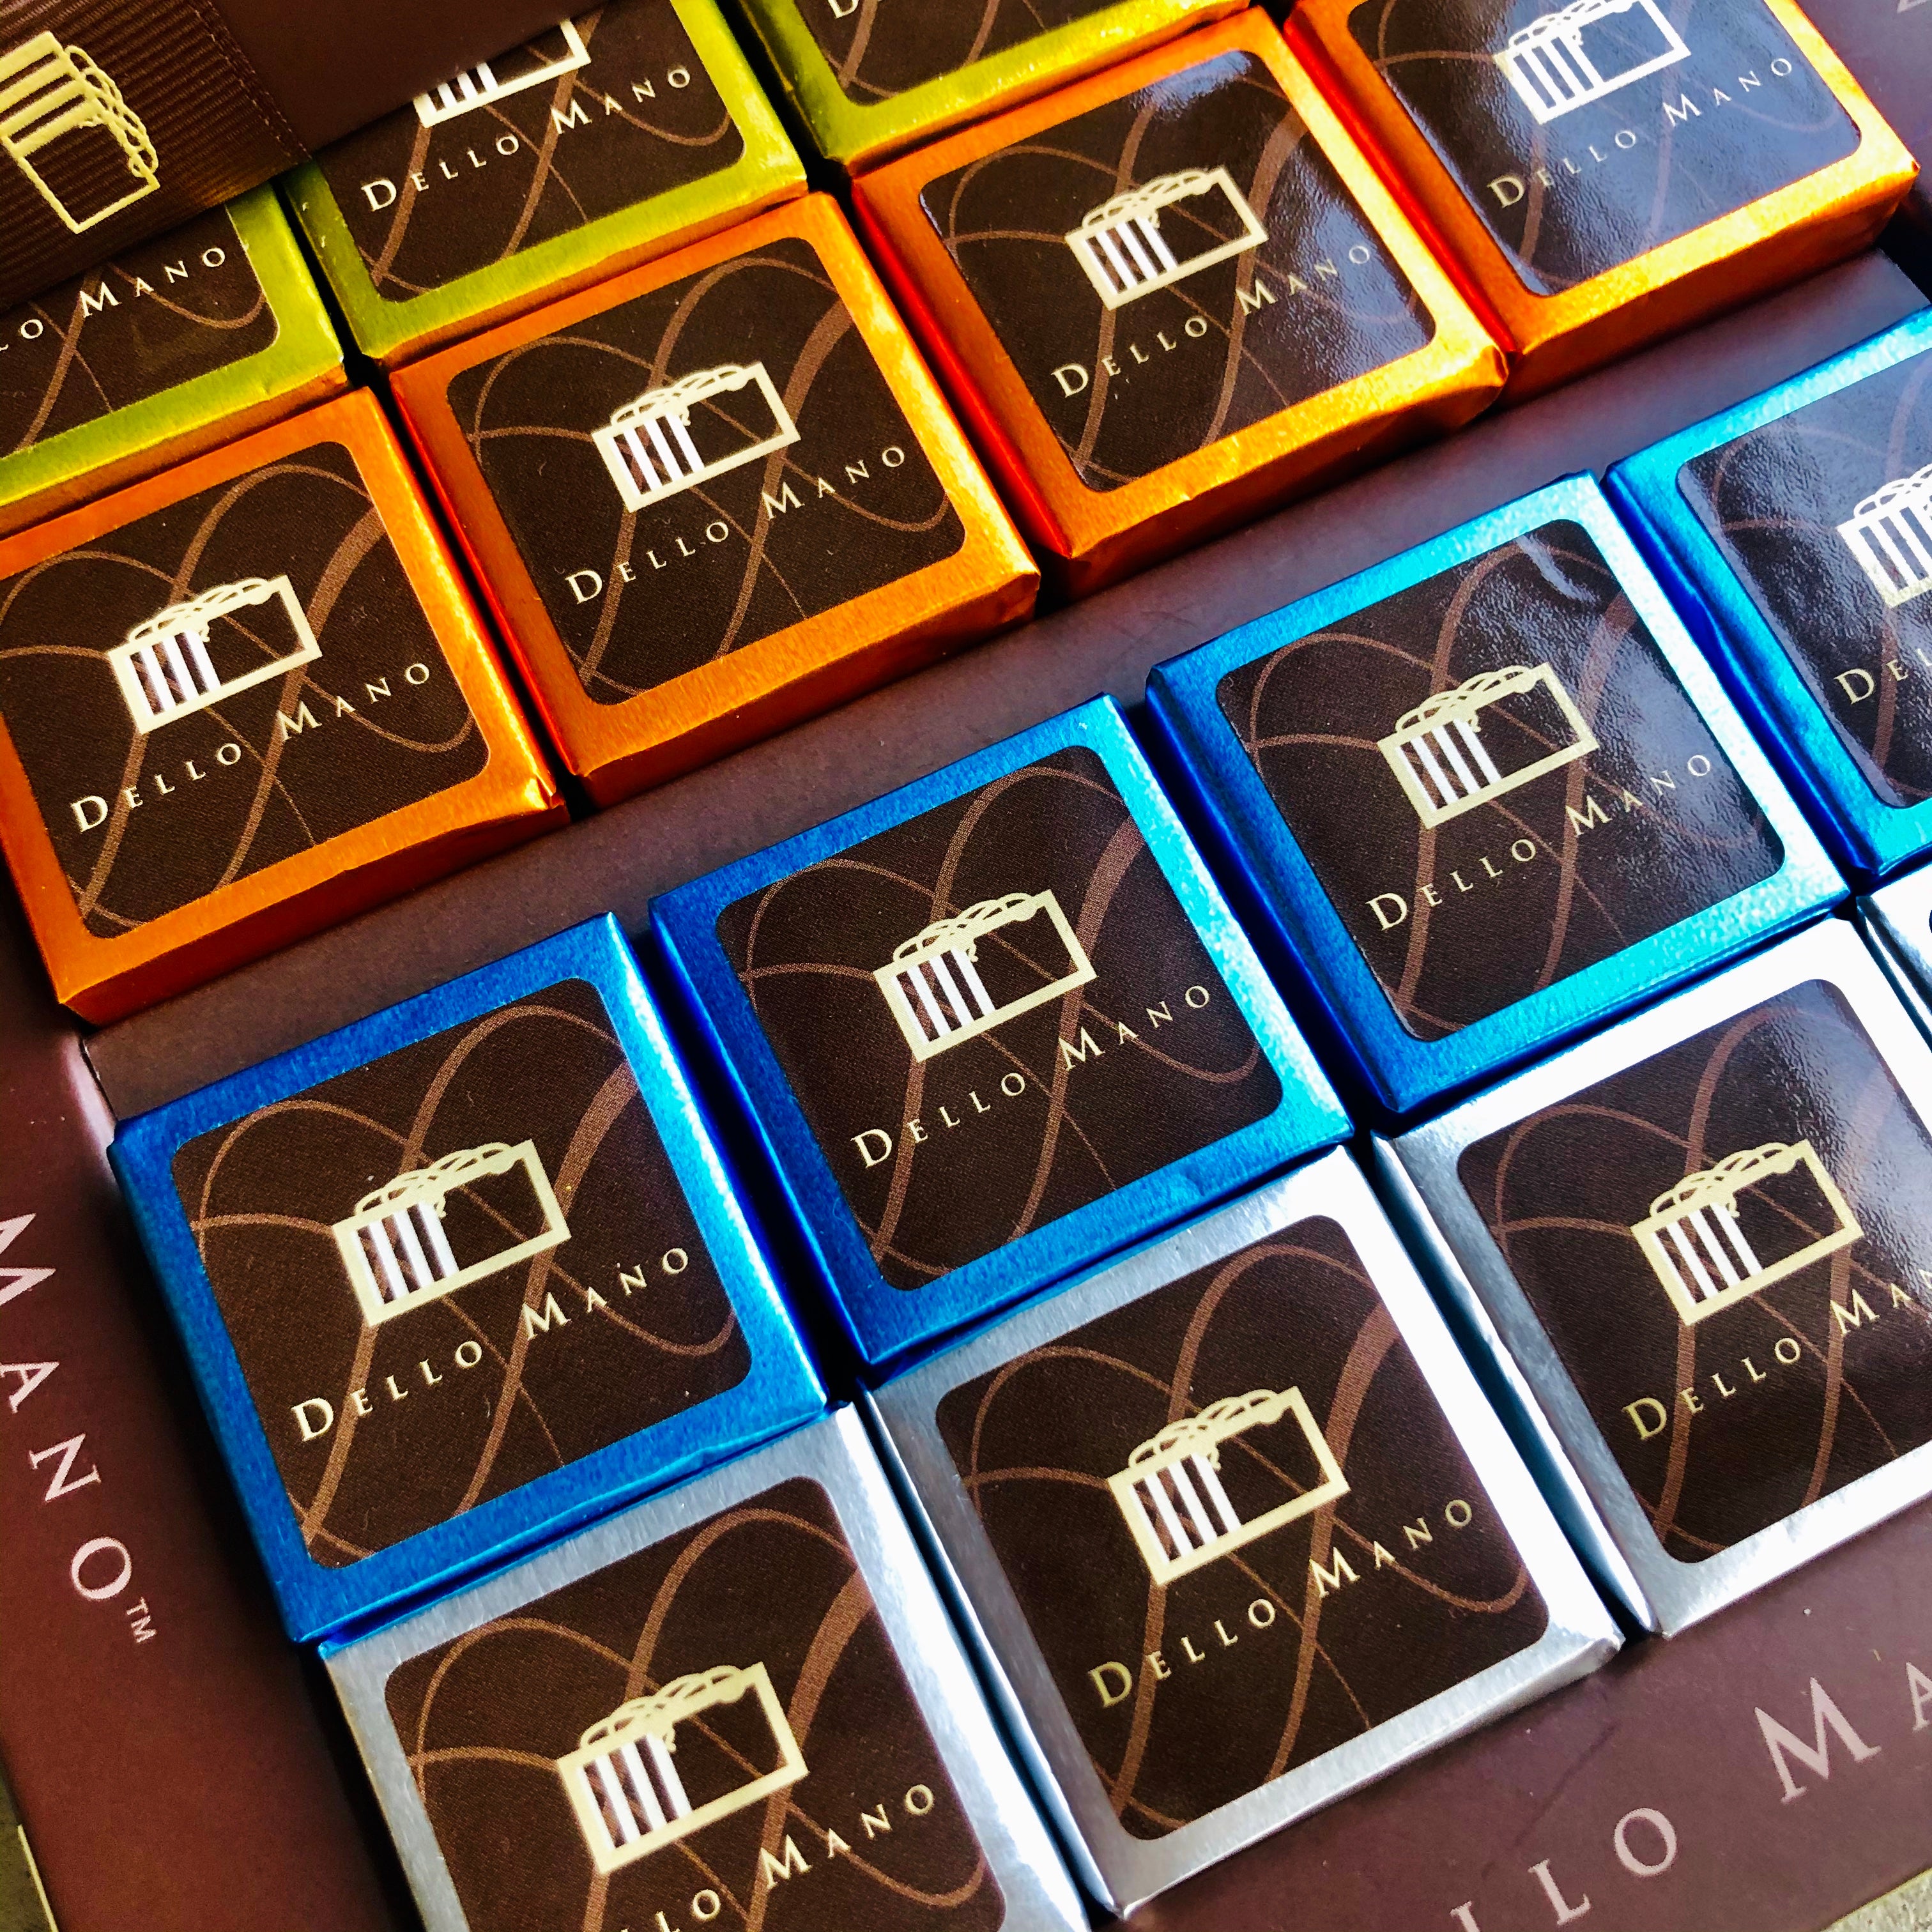 A close up of mixed foiled Brownie cubes. Each brownie has a label that says Dello Mano